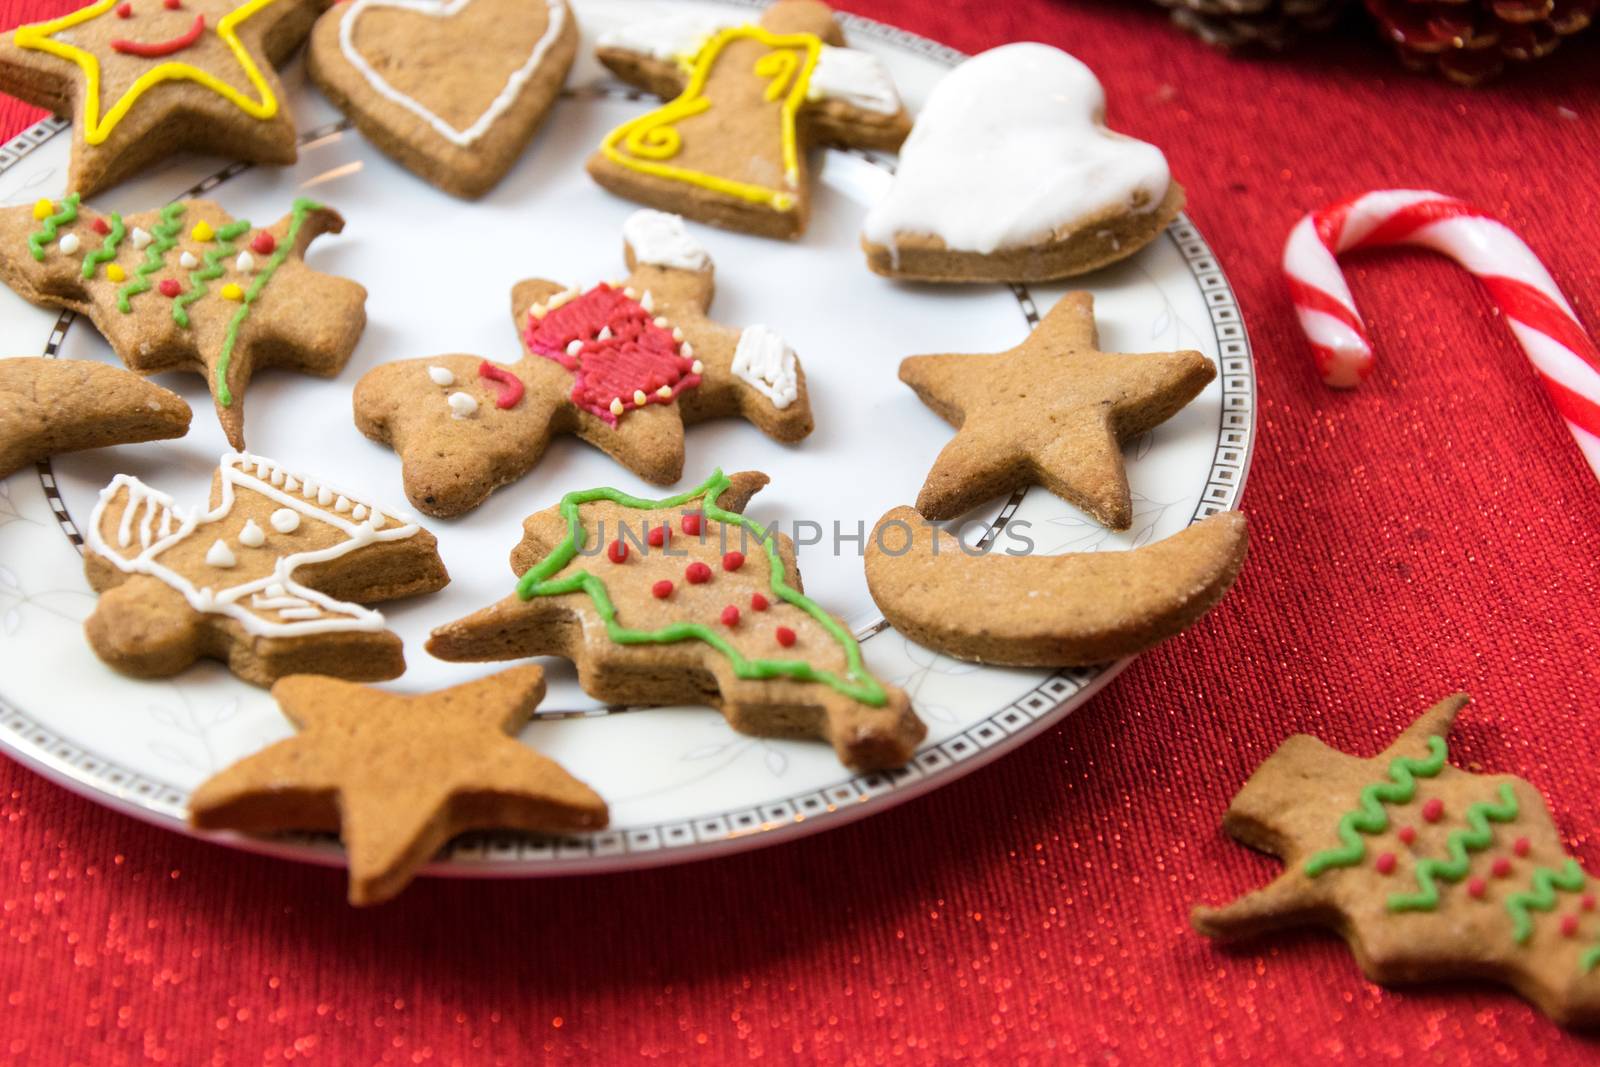 Homemade Christmas gingerbreads by wdnet_studio